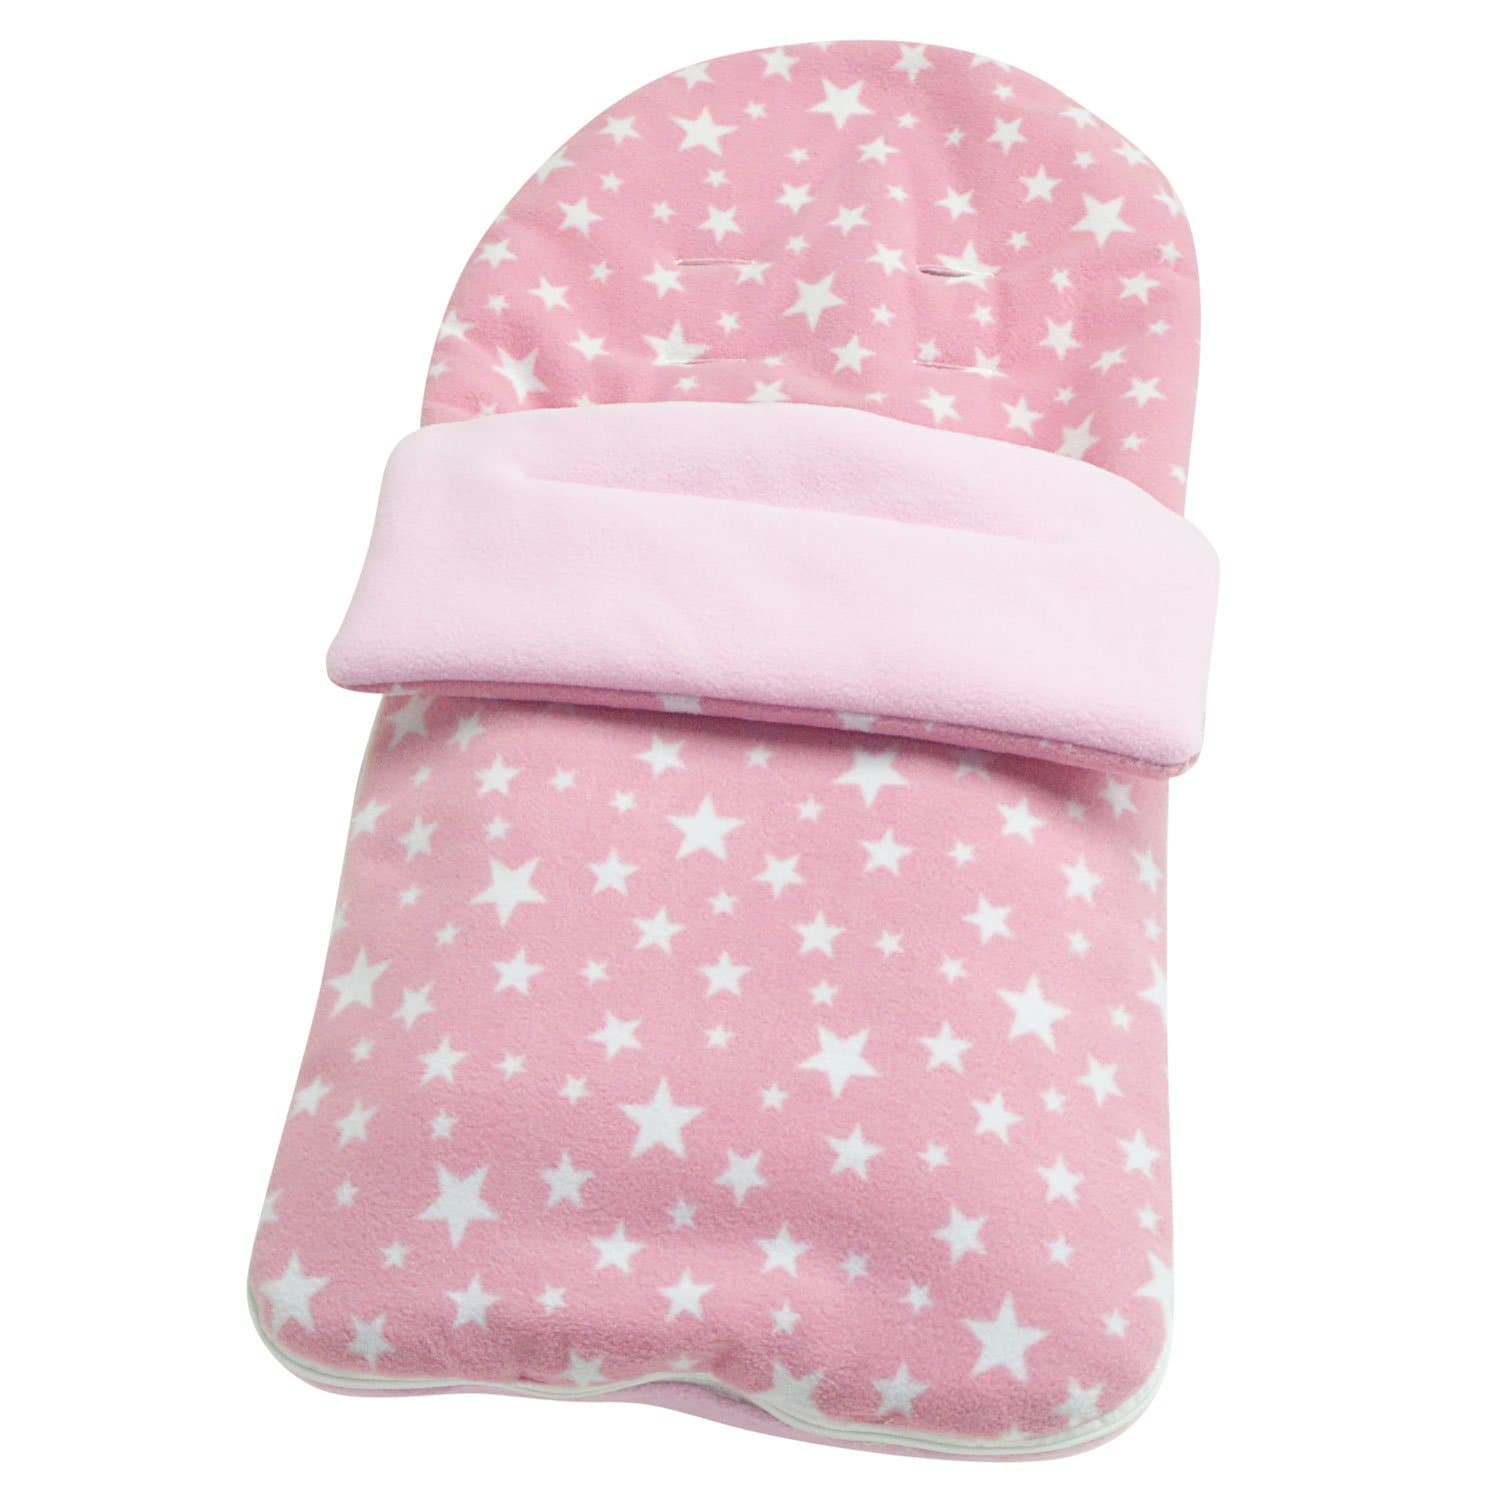 Fleece Footmuff / Cosy Toes Compatible with Stokke - For Your Little One